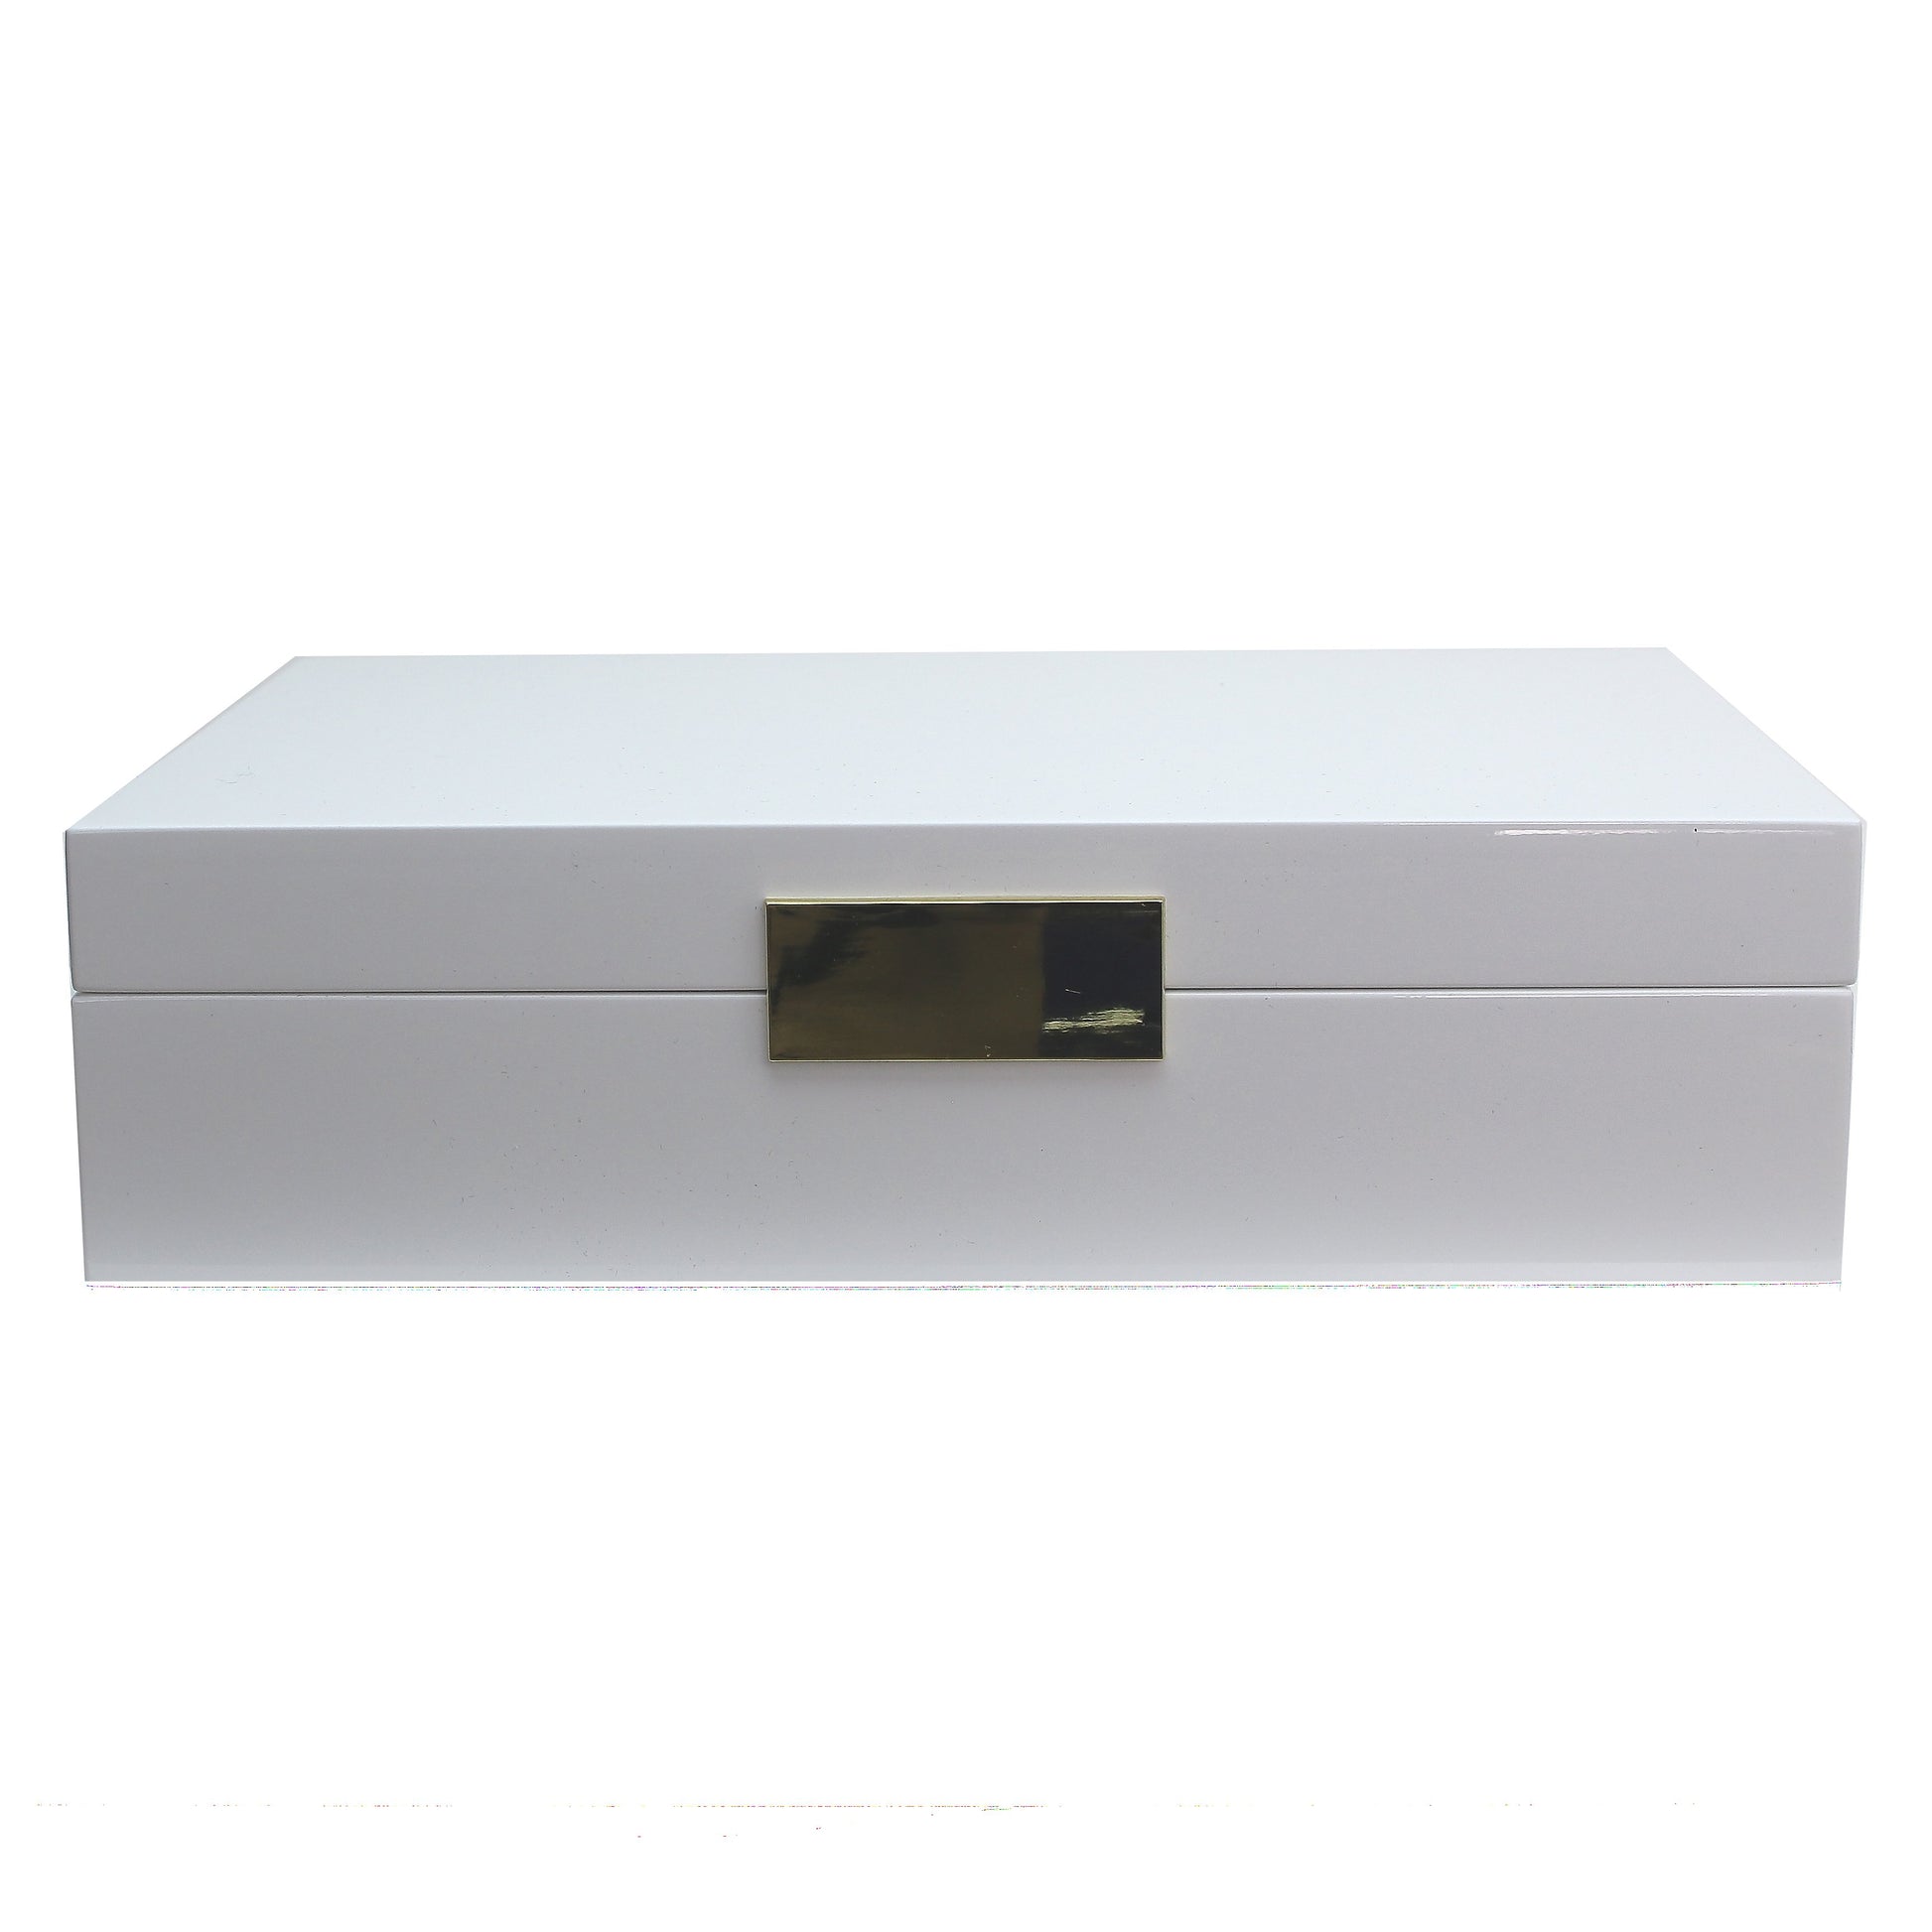 Large white jewelry box with silver plated clasp